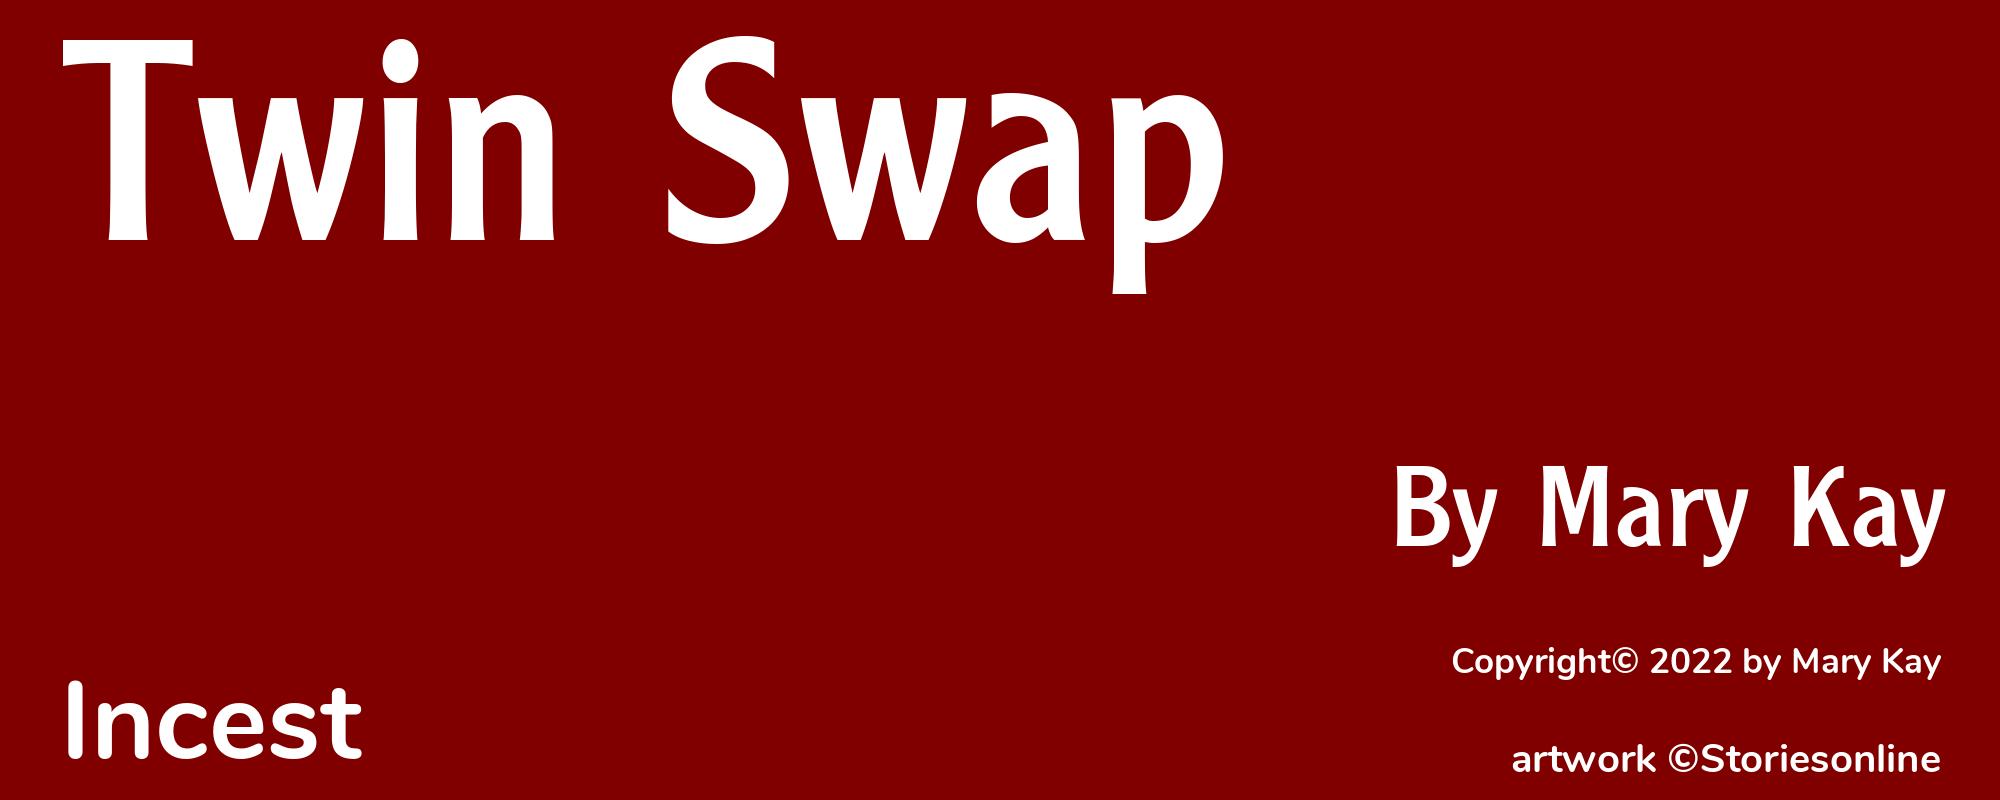 Twin Swap - Cover